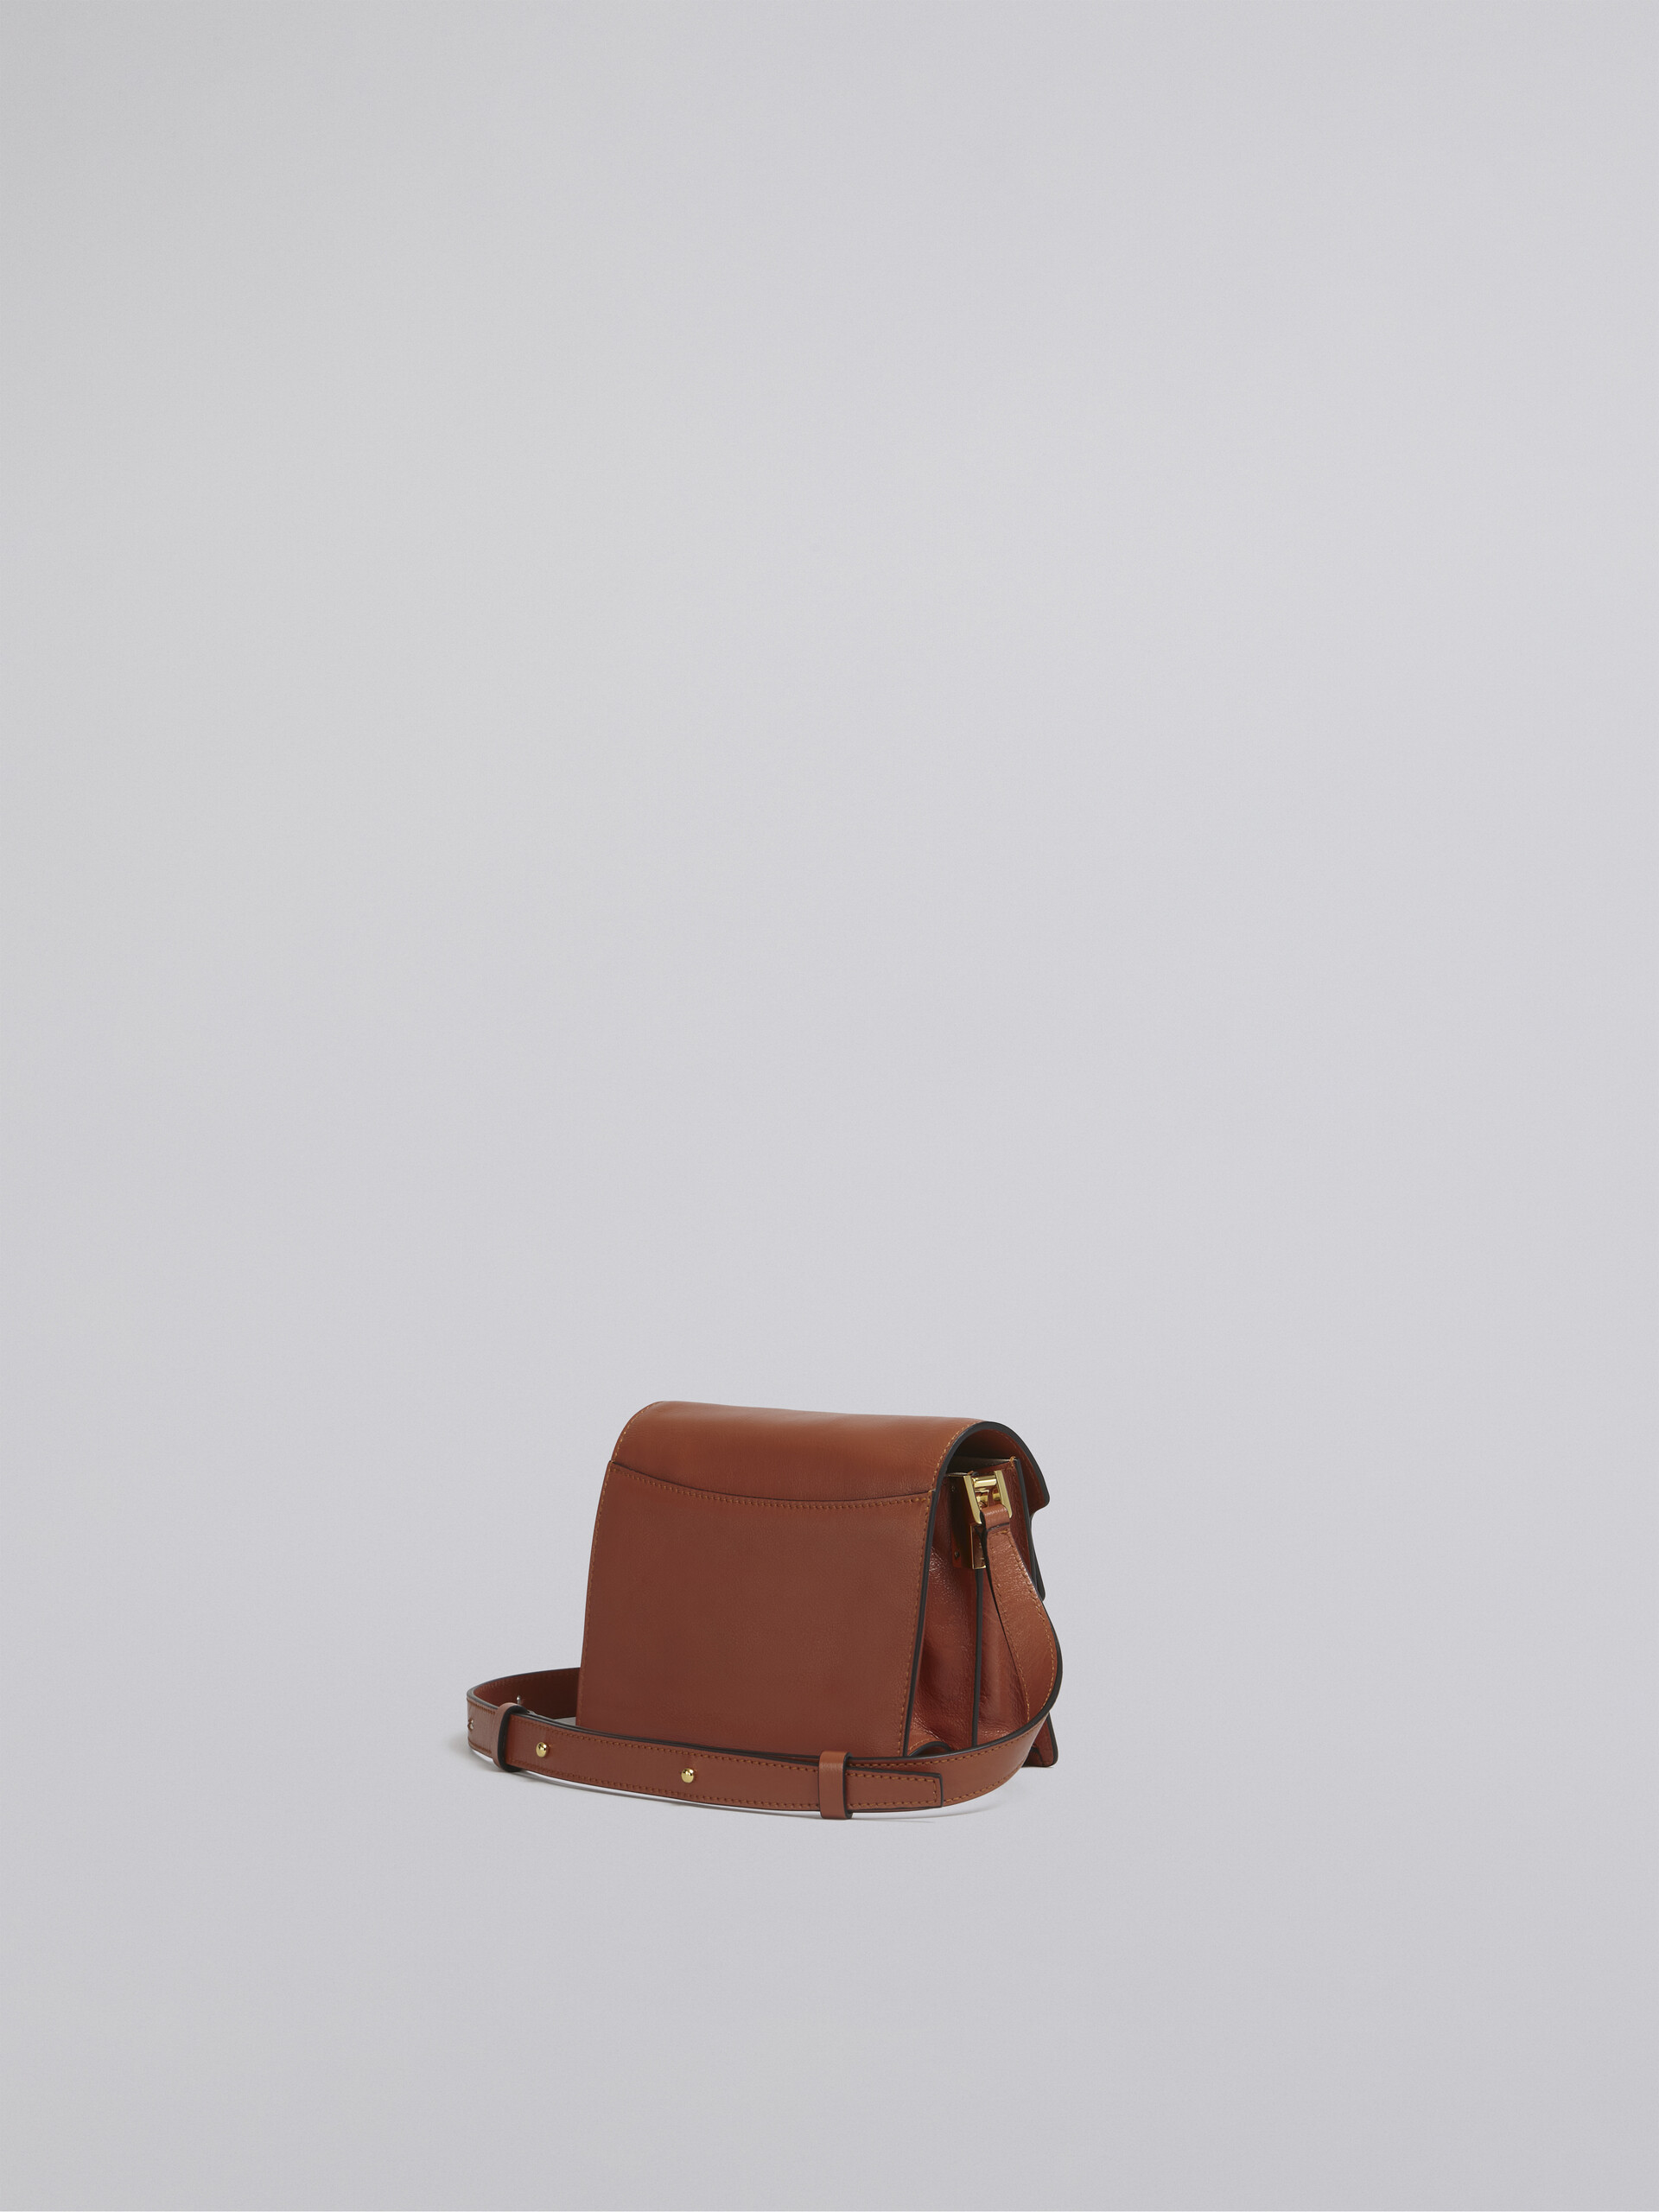 TRUNK SOFT mini bag in brown leather - Shoulder Bags - Image 3